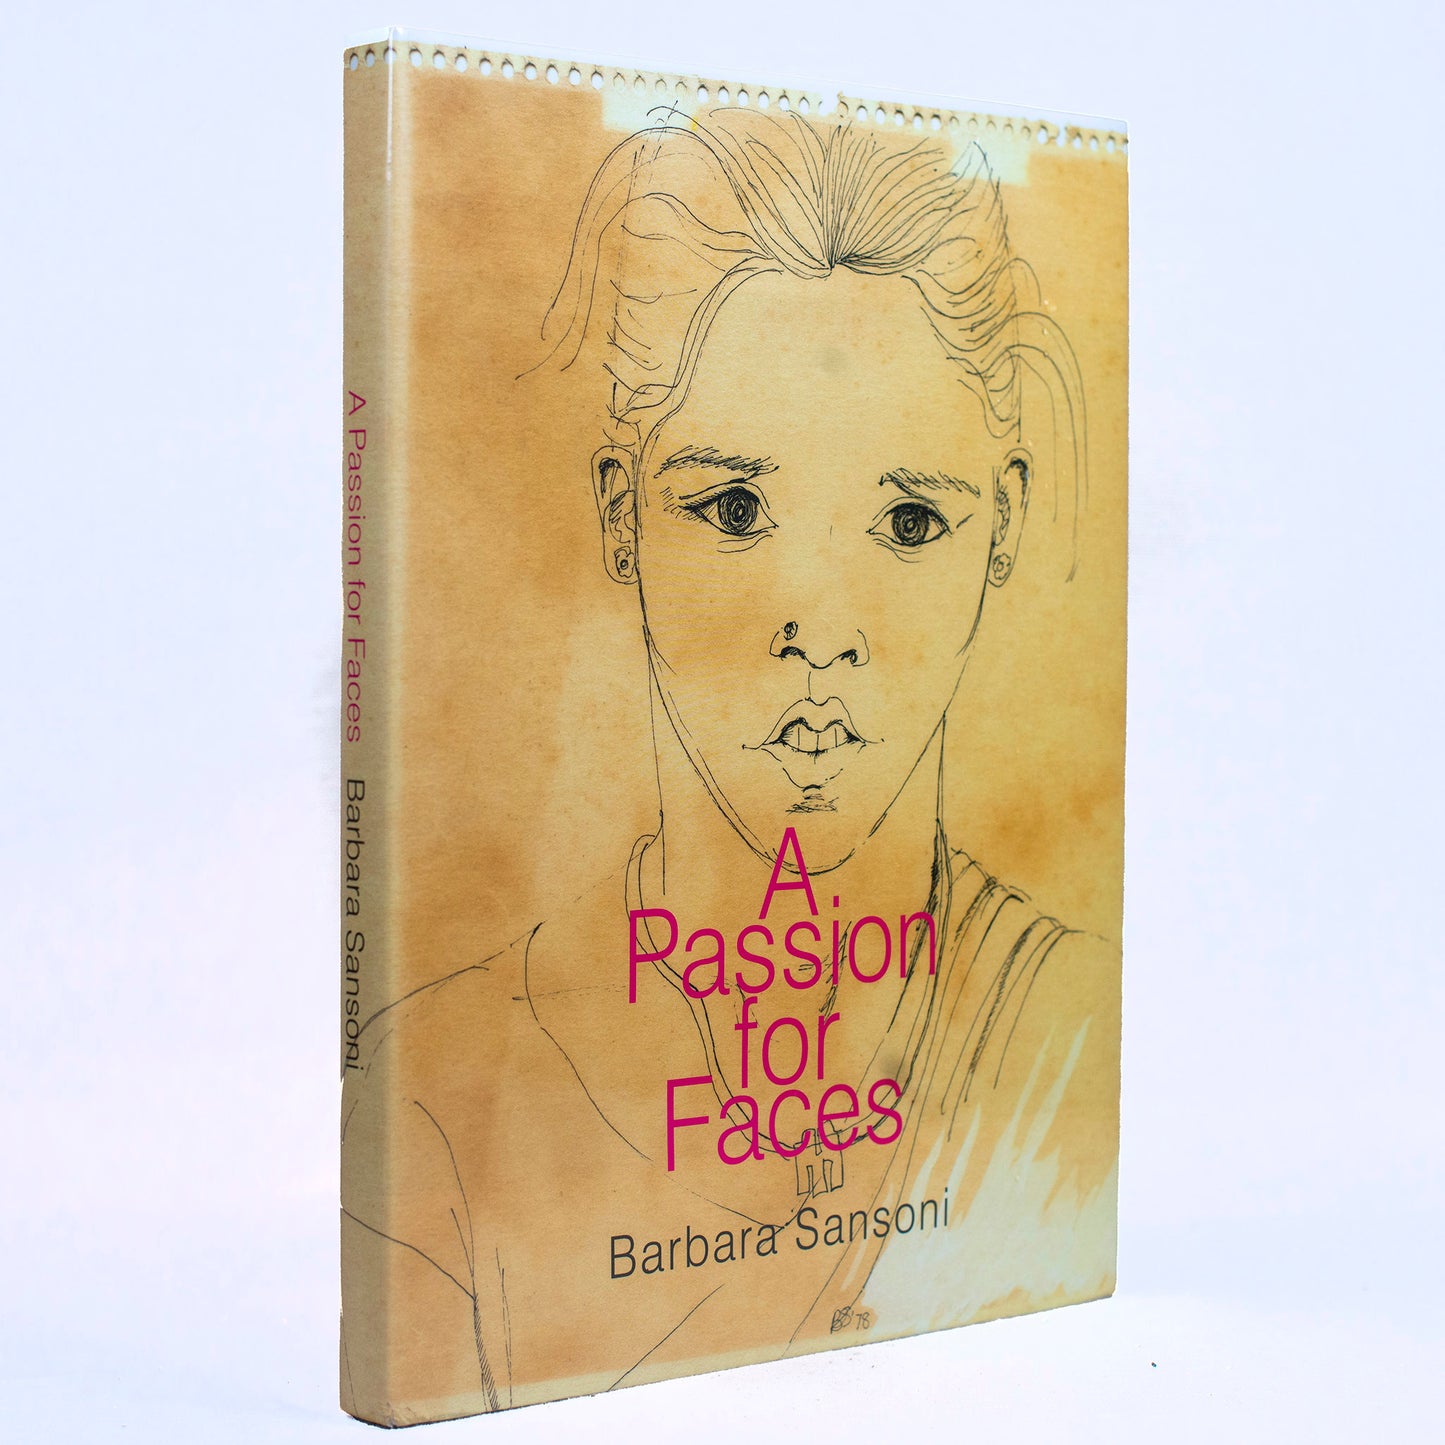 A Passion for Faces by Barbara Sansoni